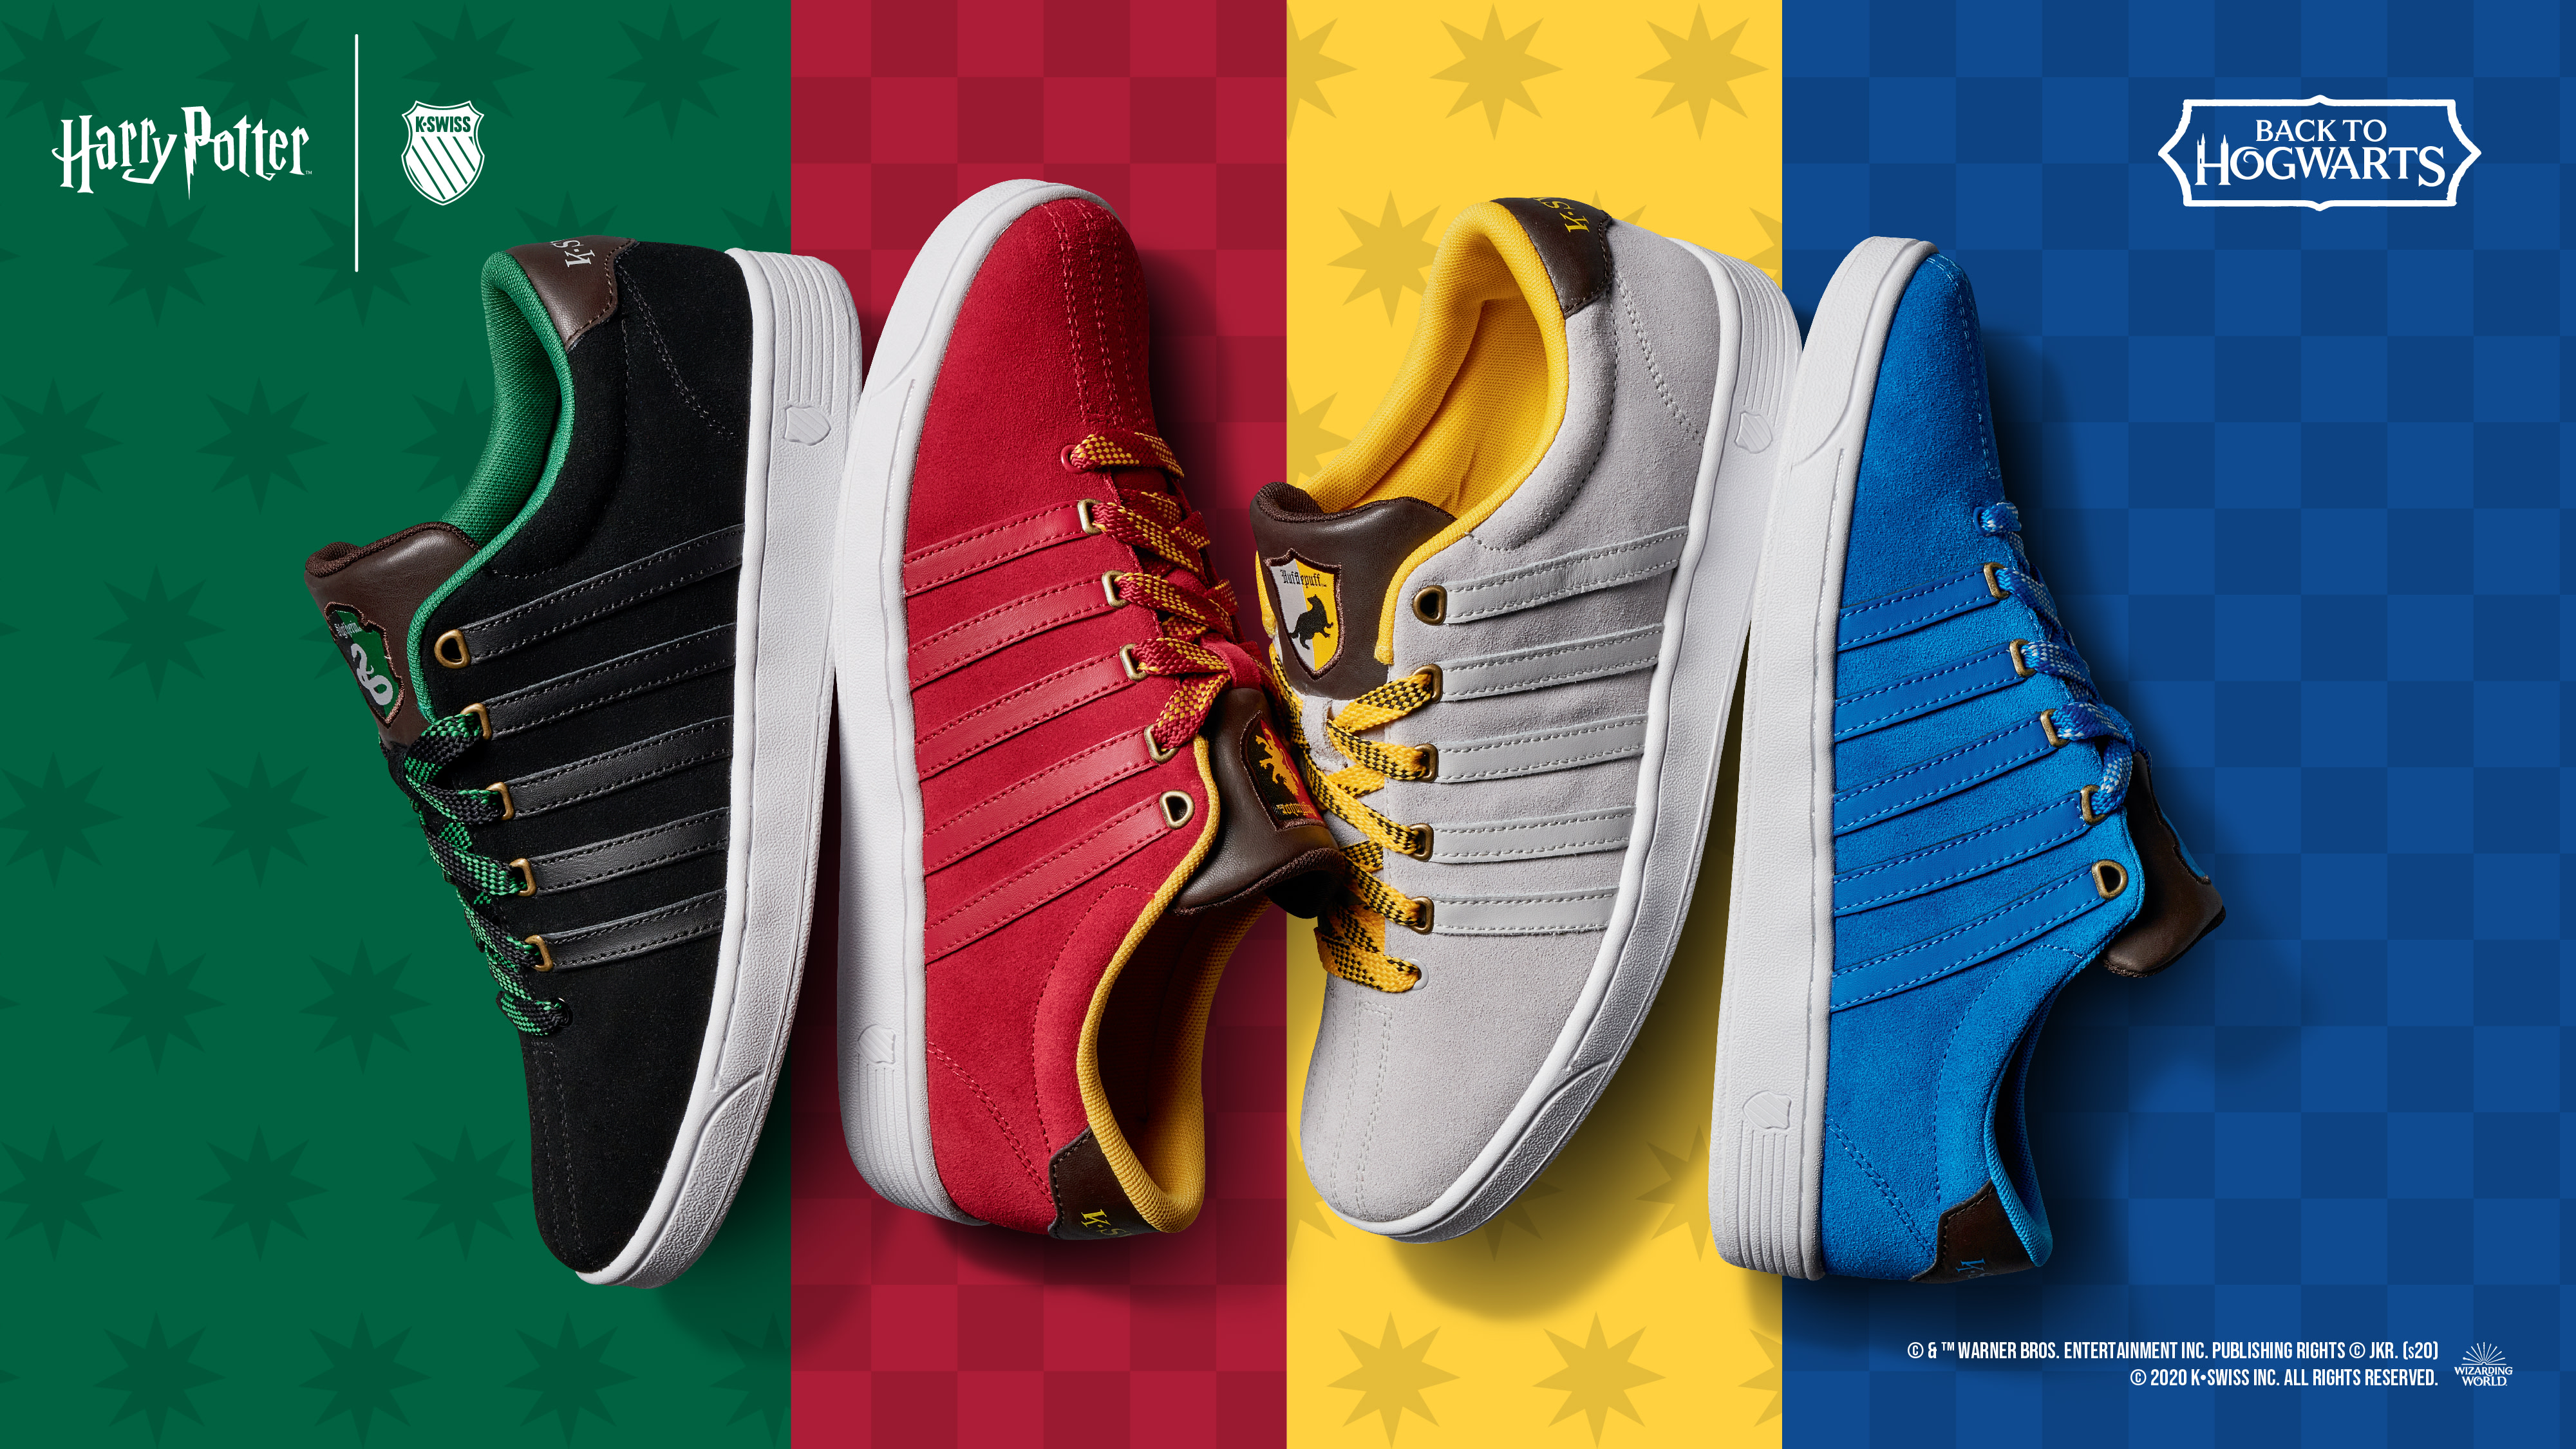 The New Harry Potter X K Swiss Shoes From 31st July